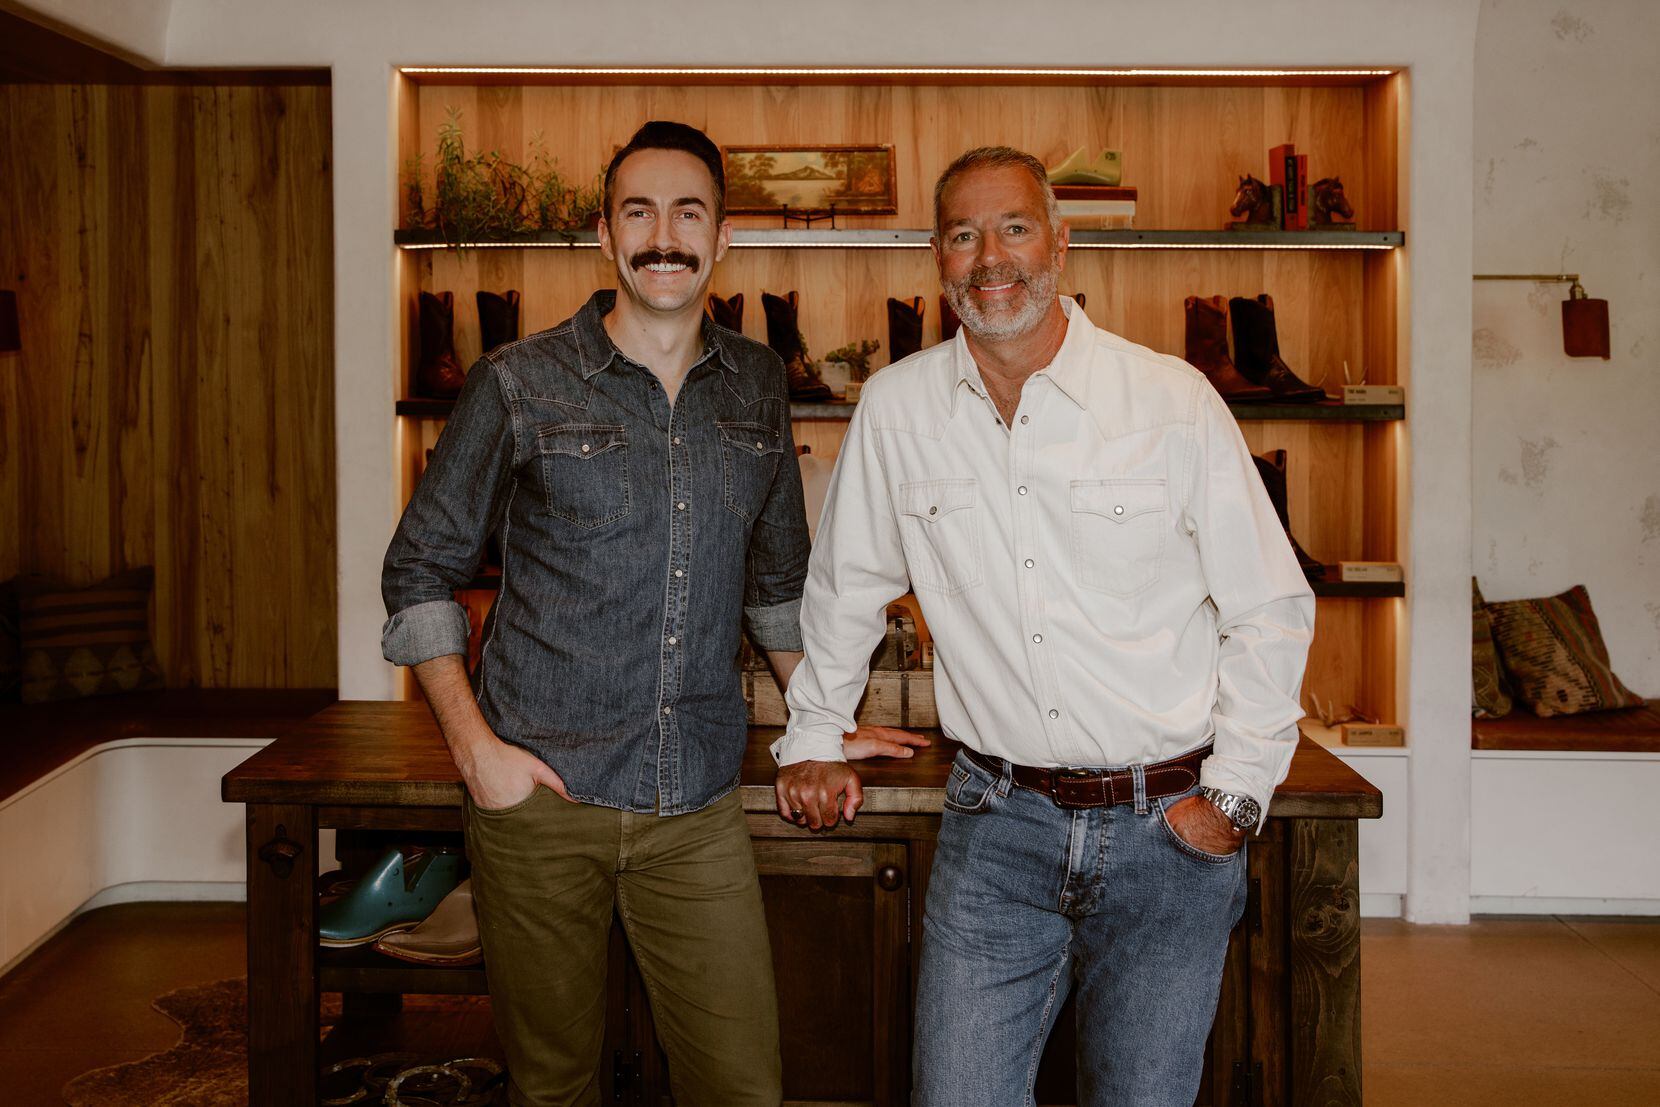 Paul Hedrick, founder and CEO of Tecovas (left) with David Lafitte (right) who becomes CEO...